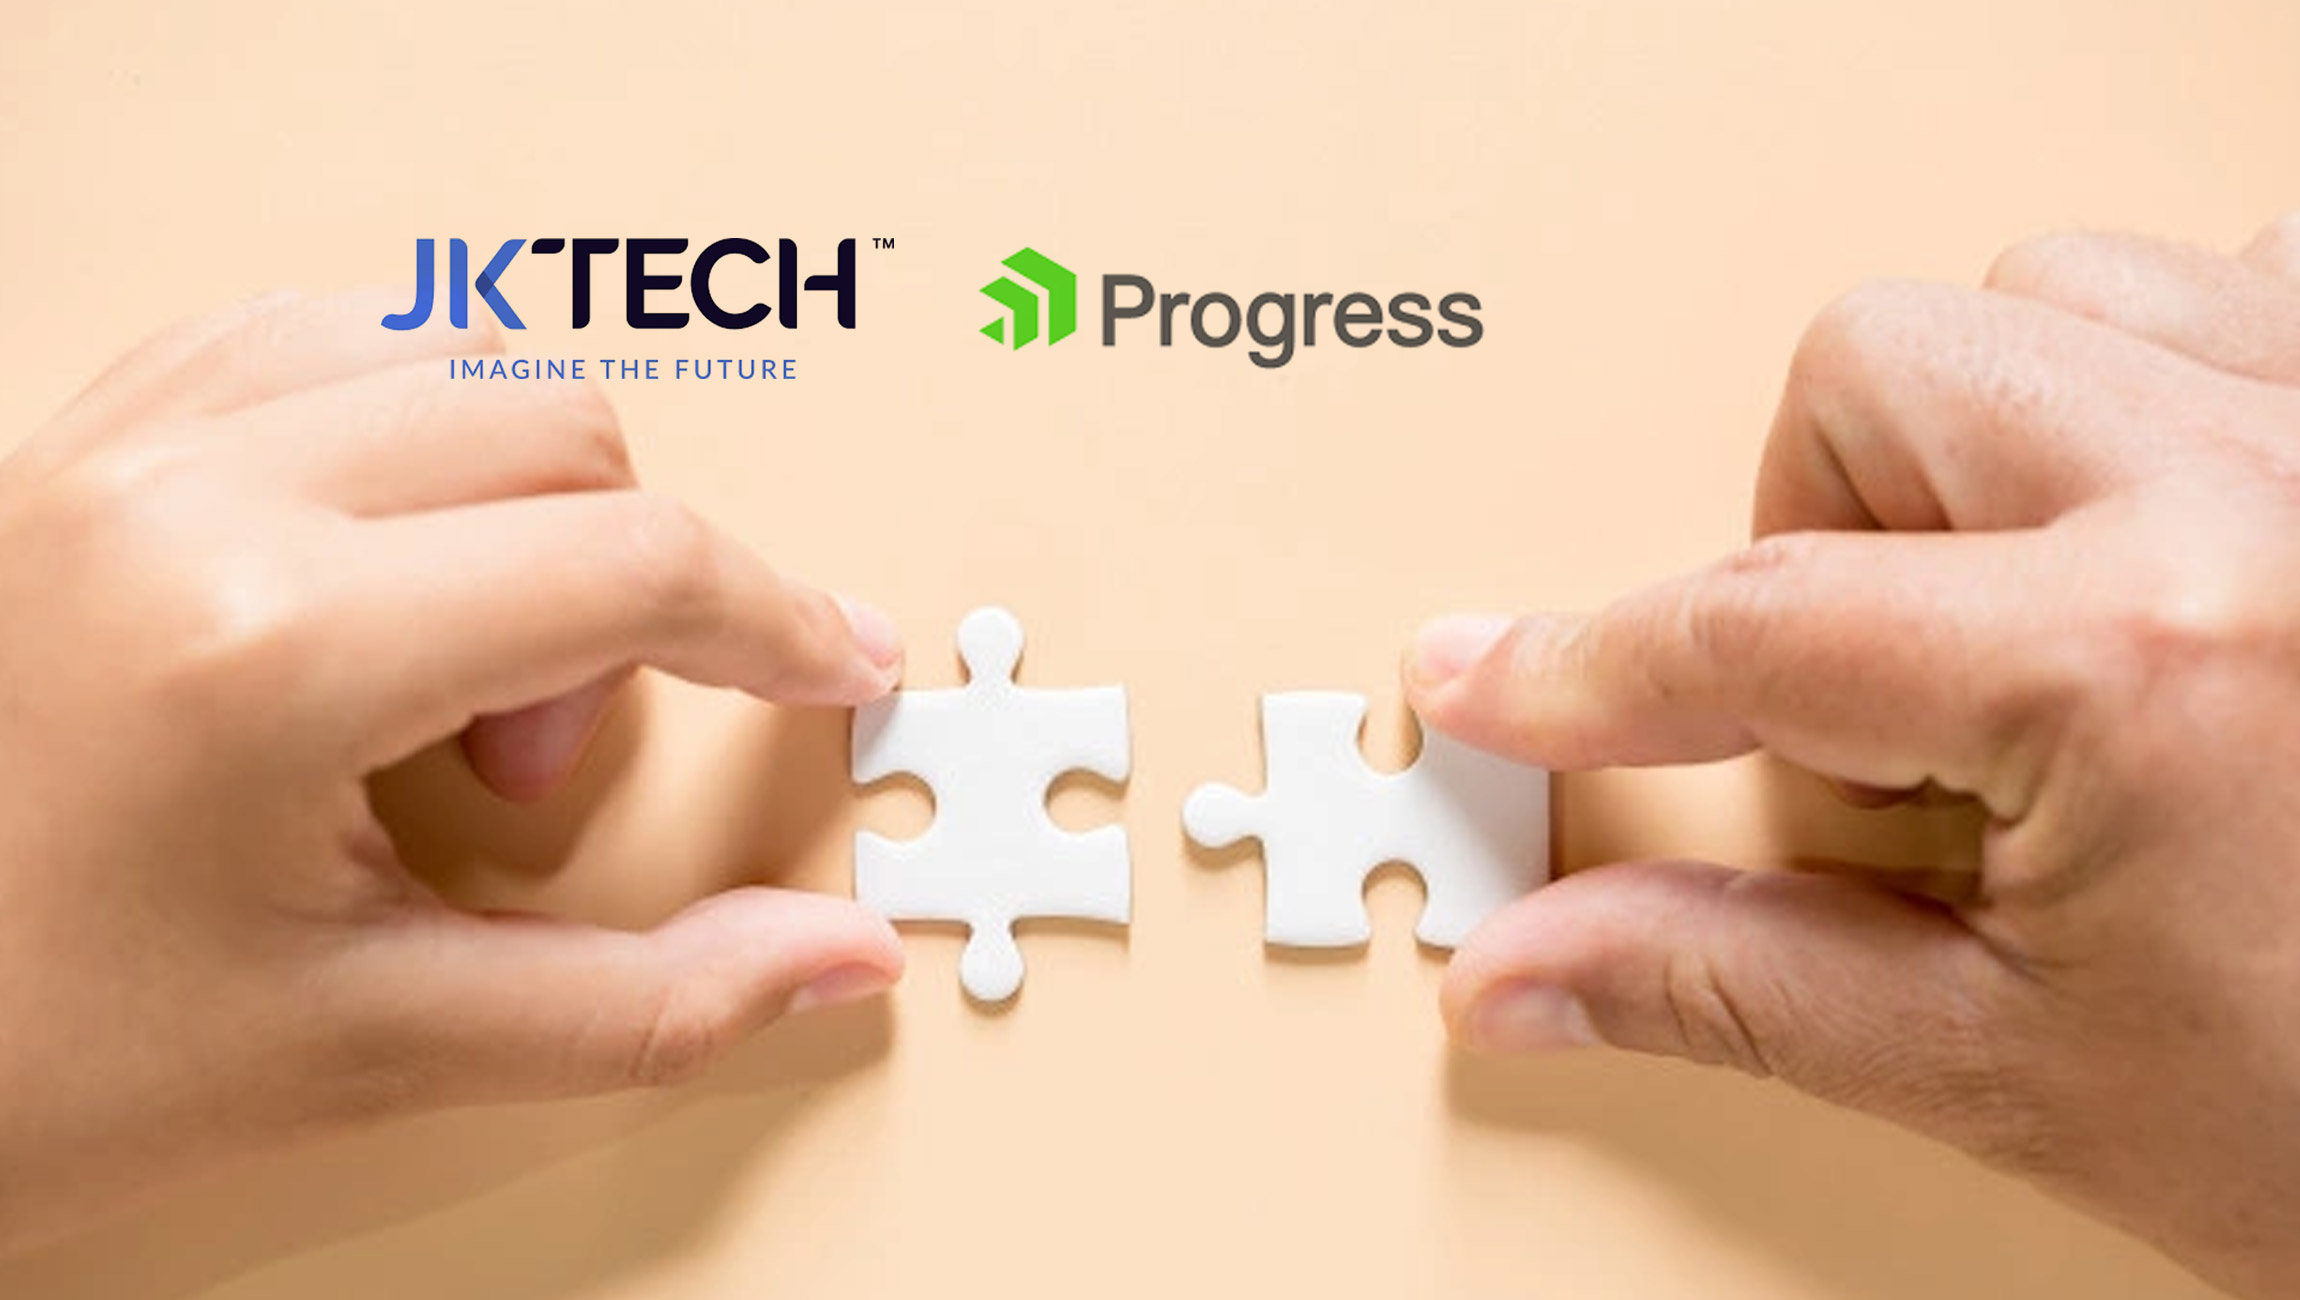 JK Tech Expands its Presence in the US through collaboration with Progress